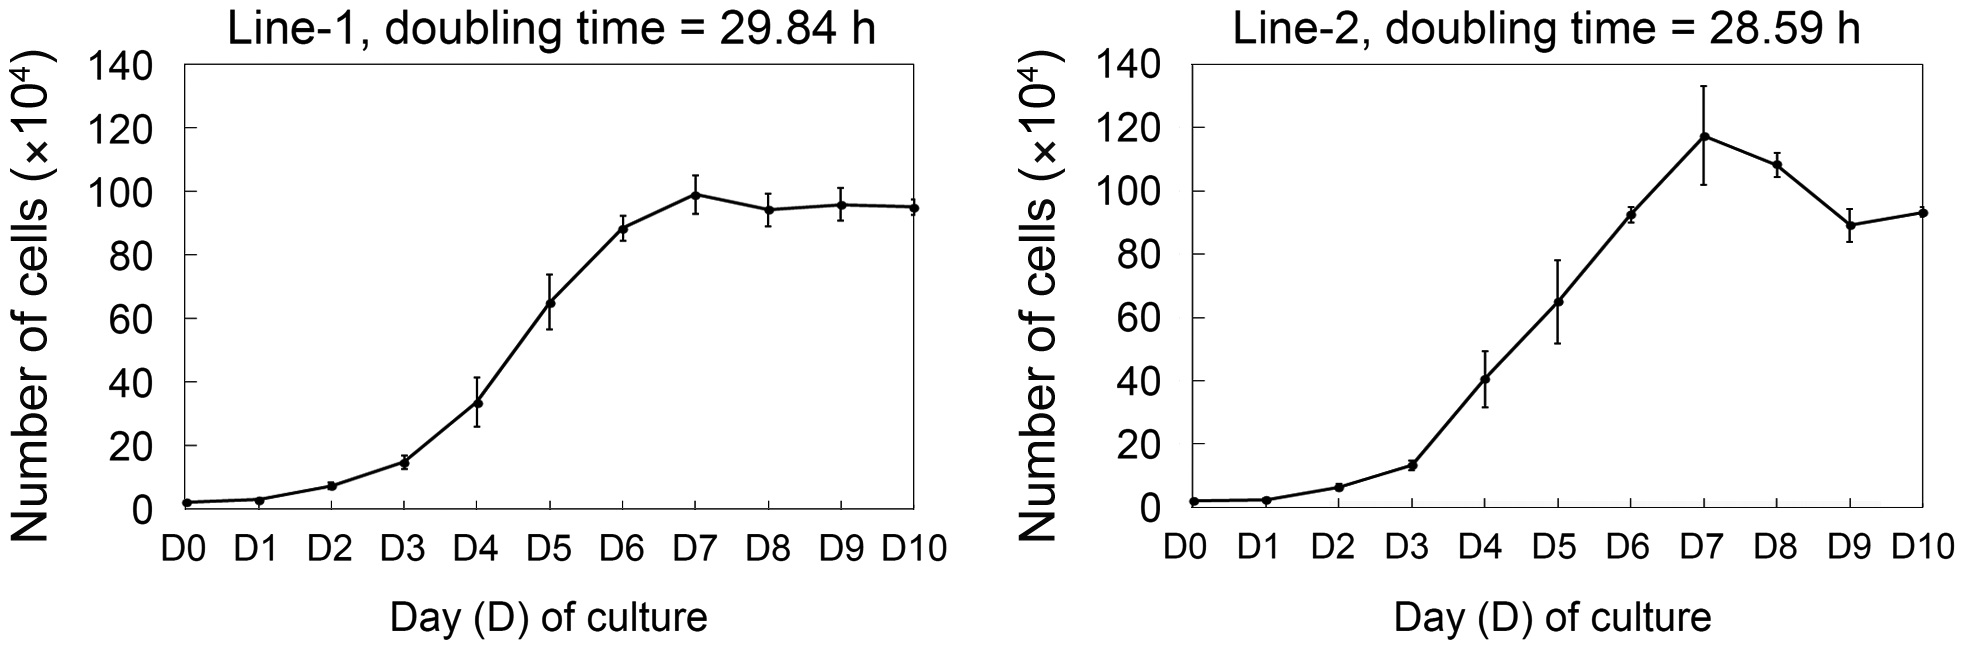 Growth rate of two permanent cell lines. Total 2 × 104 cells were initially seeded on culture plates and cell number was daily counted during 10
days. Doubling times of each cell line were 29.84 h and 28.59 h in cell line-1 and cell line-2, respectively. The experiments were conducted three times in
independent manner and the values were expressed as mean ± SD.